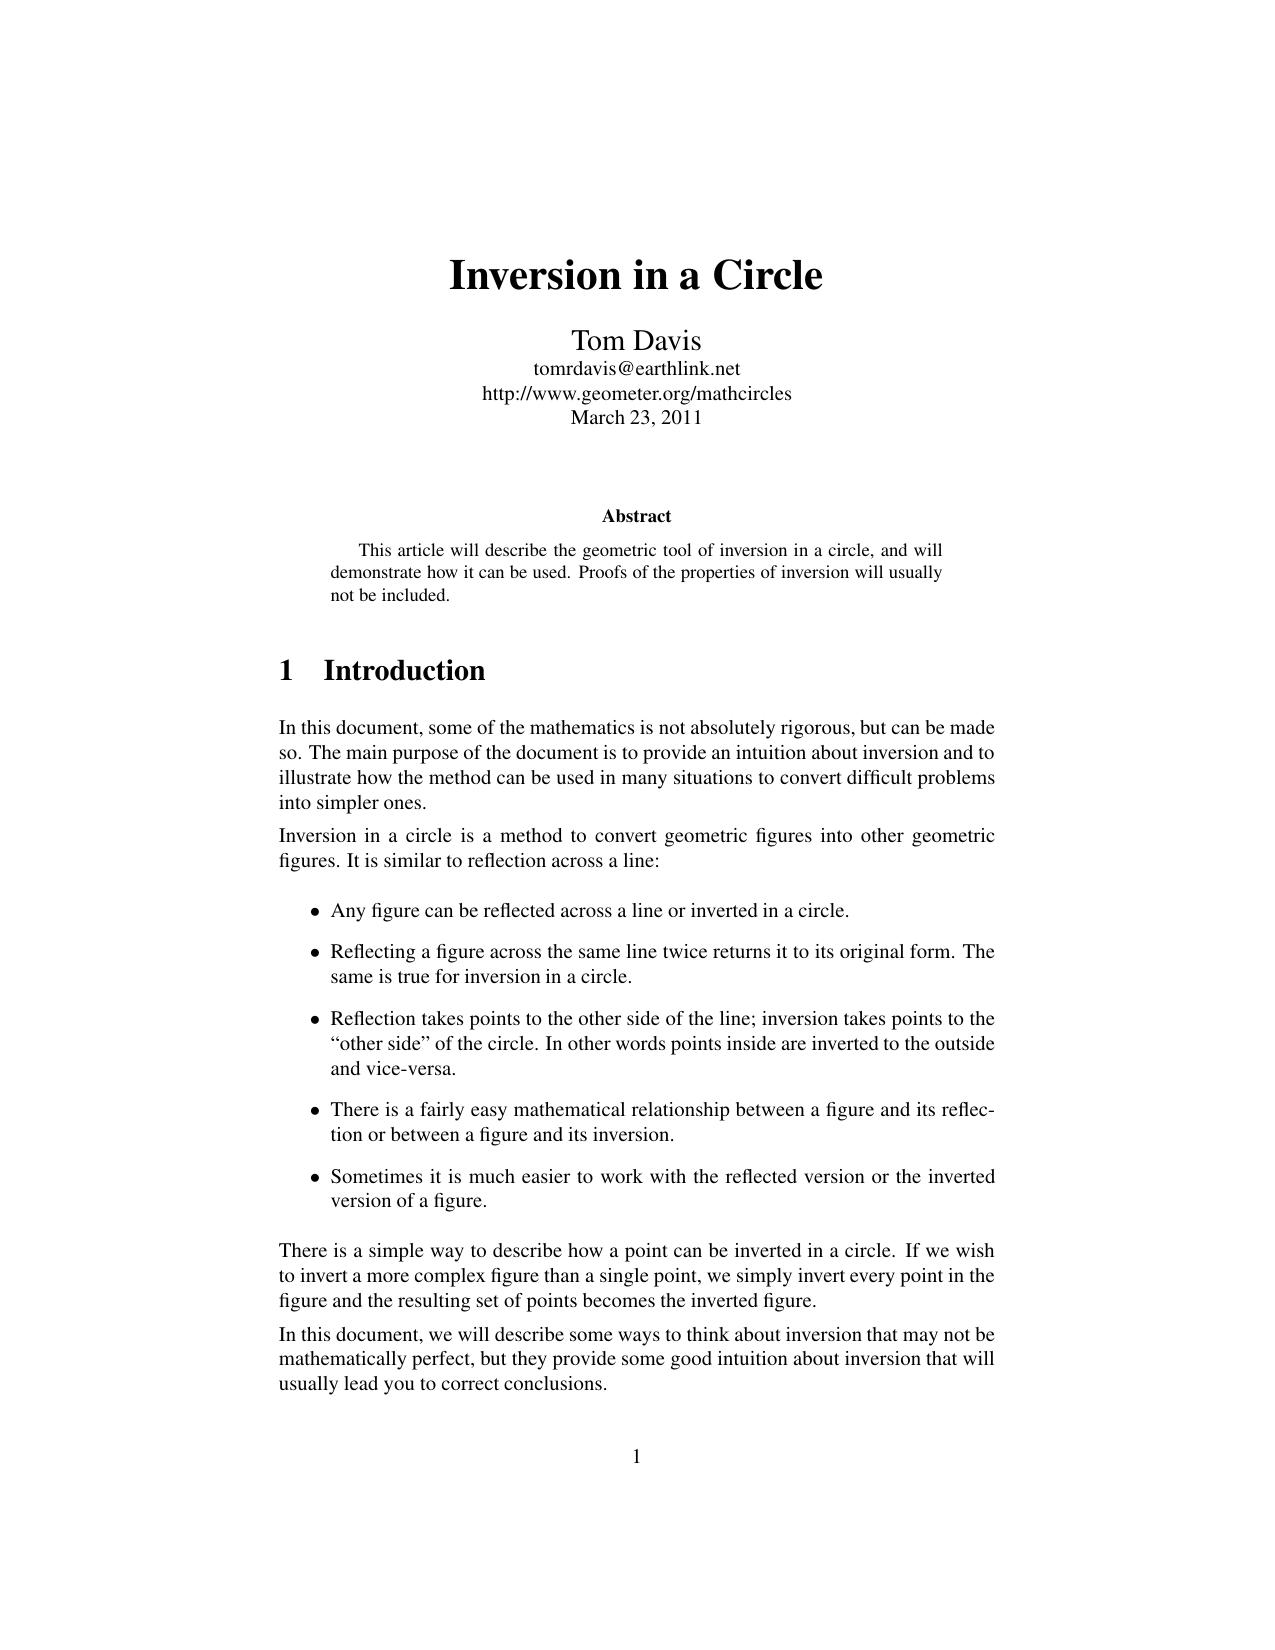 Inversion in a Circle - Essay